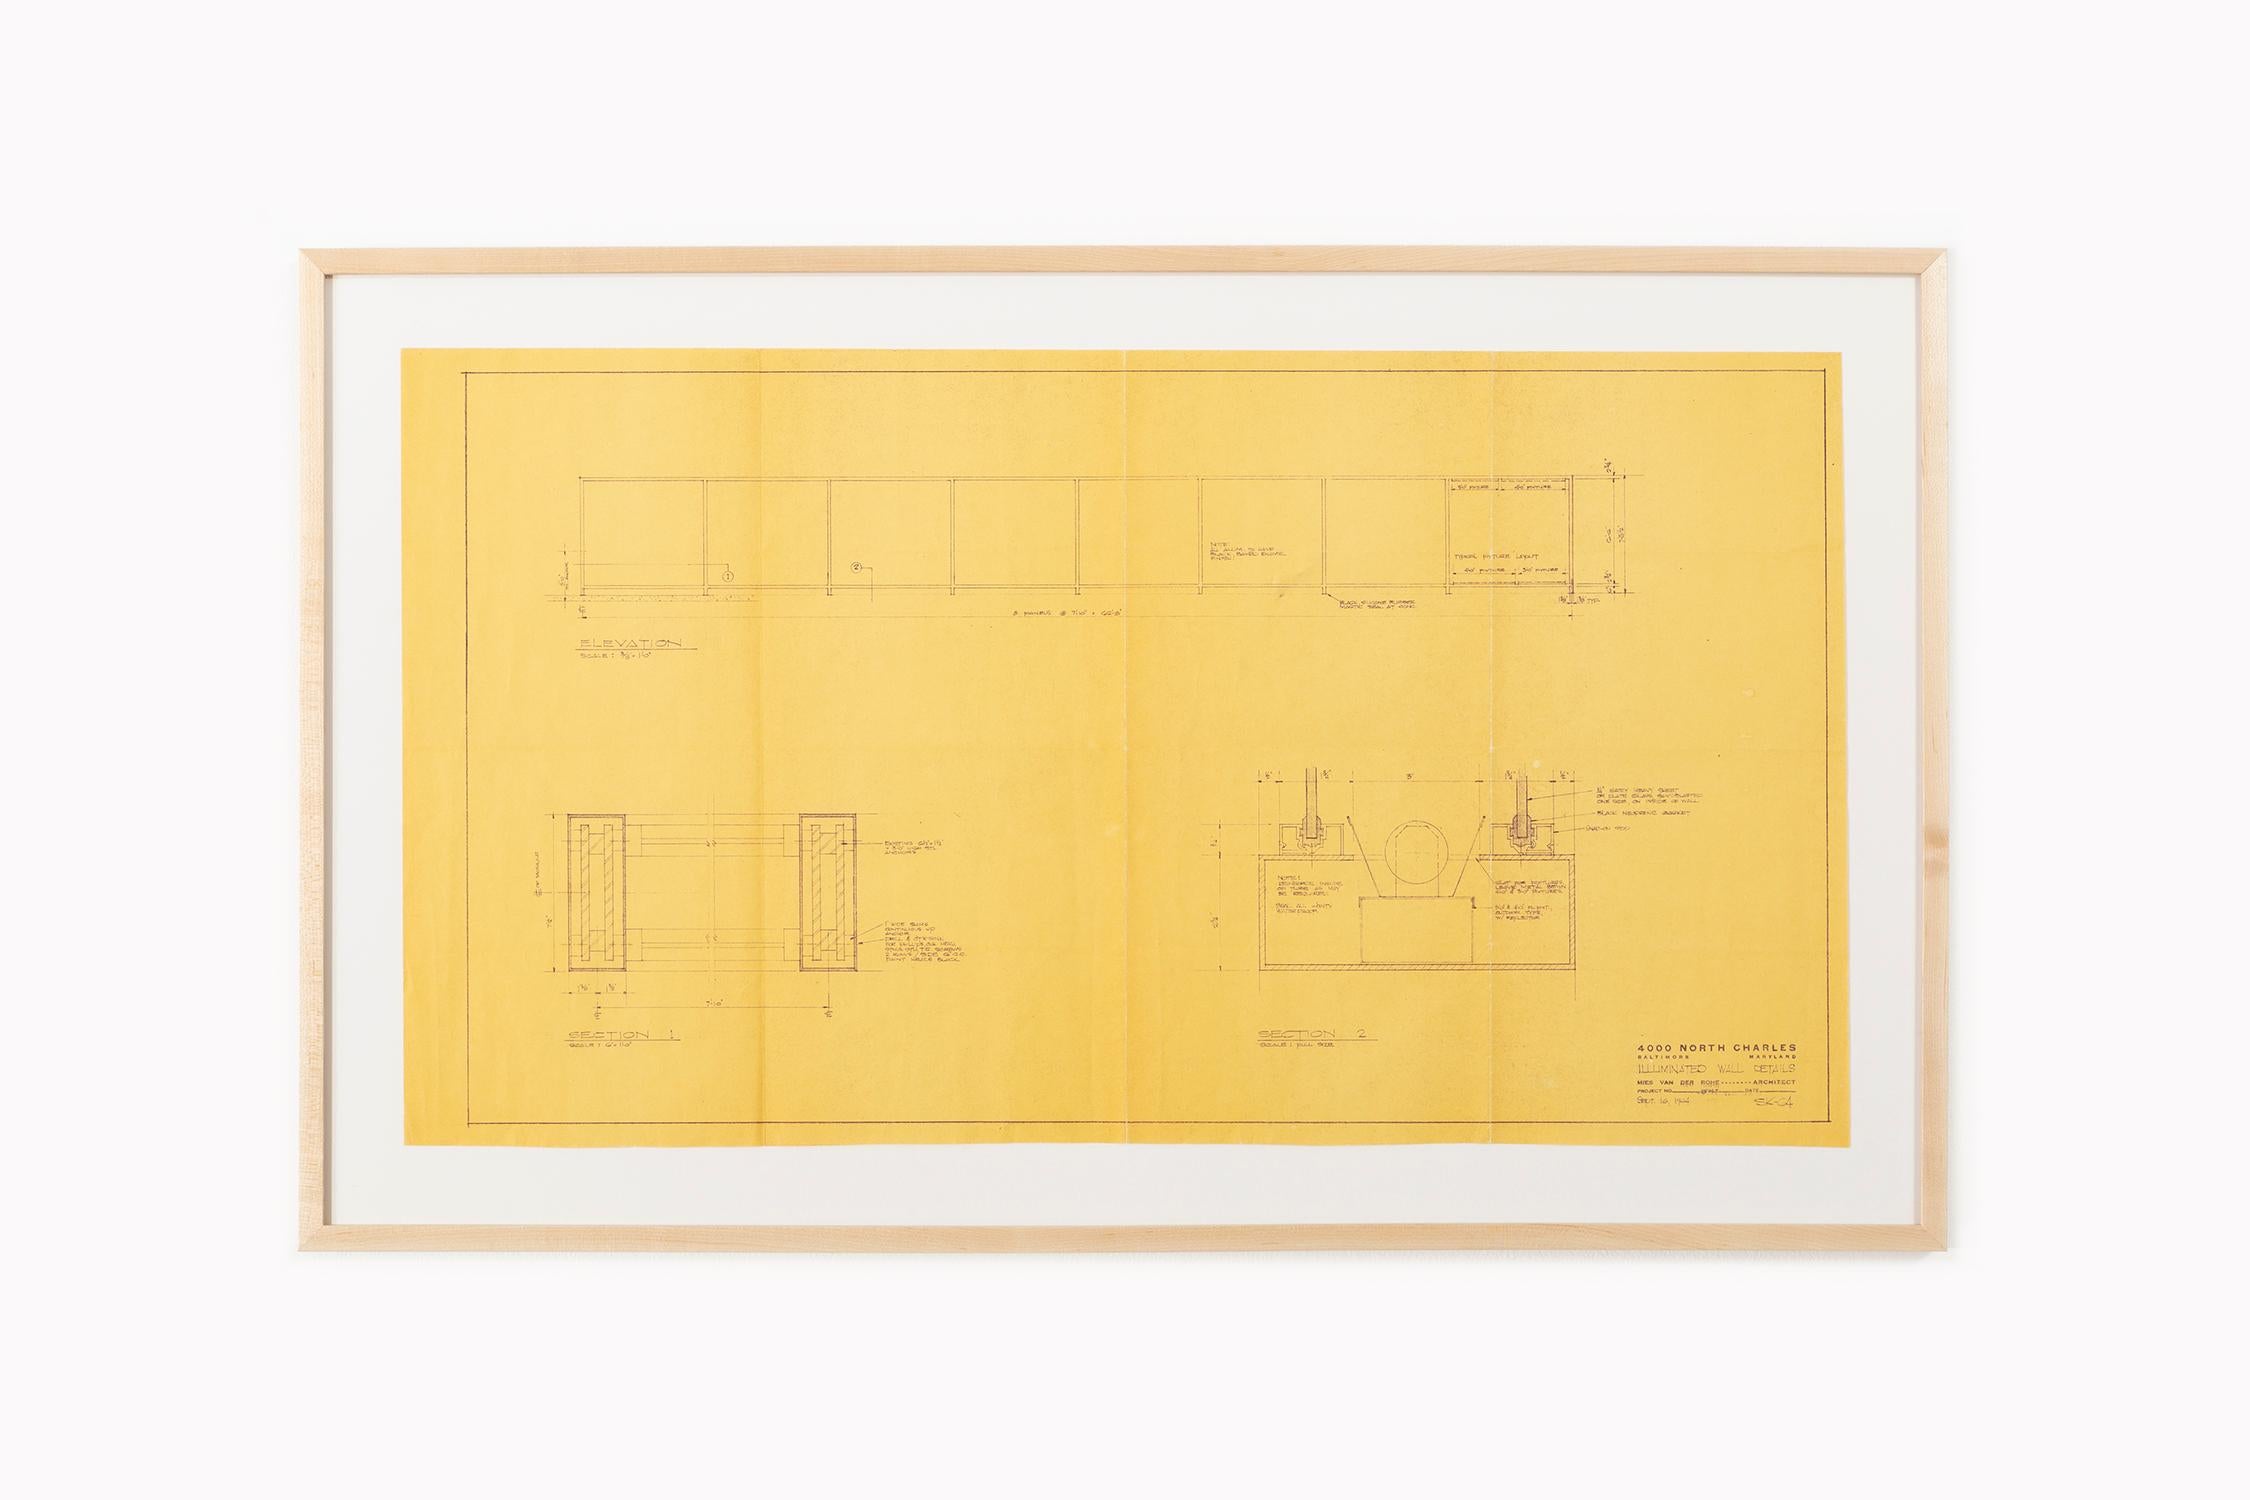 American Mies van der Rohe Blueprint, 4000 N. Charles Baltimore, Md, Roof and Penthouse For Sale